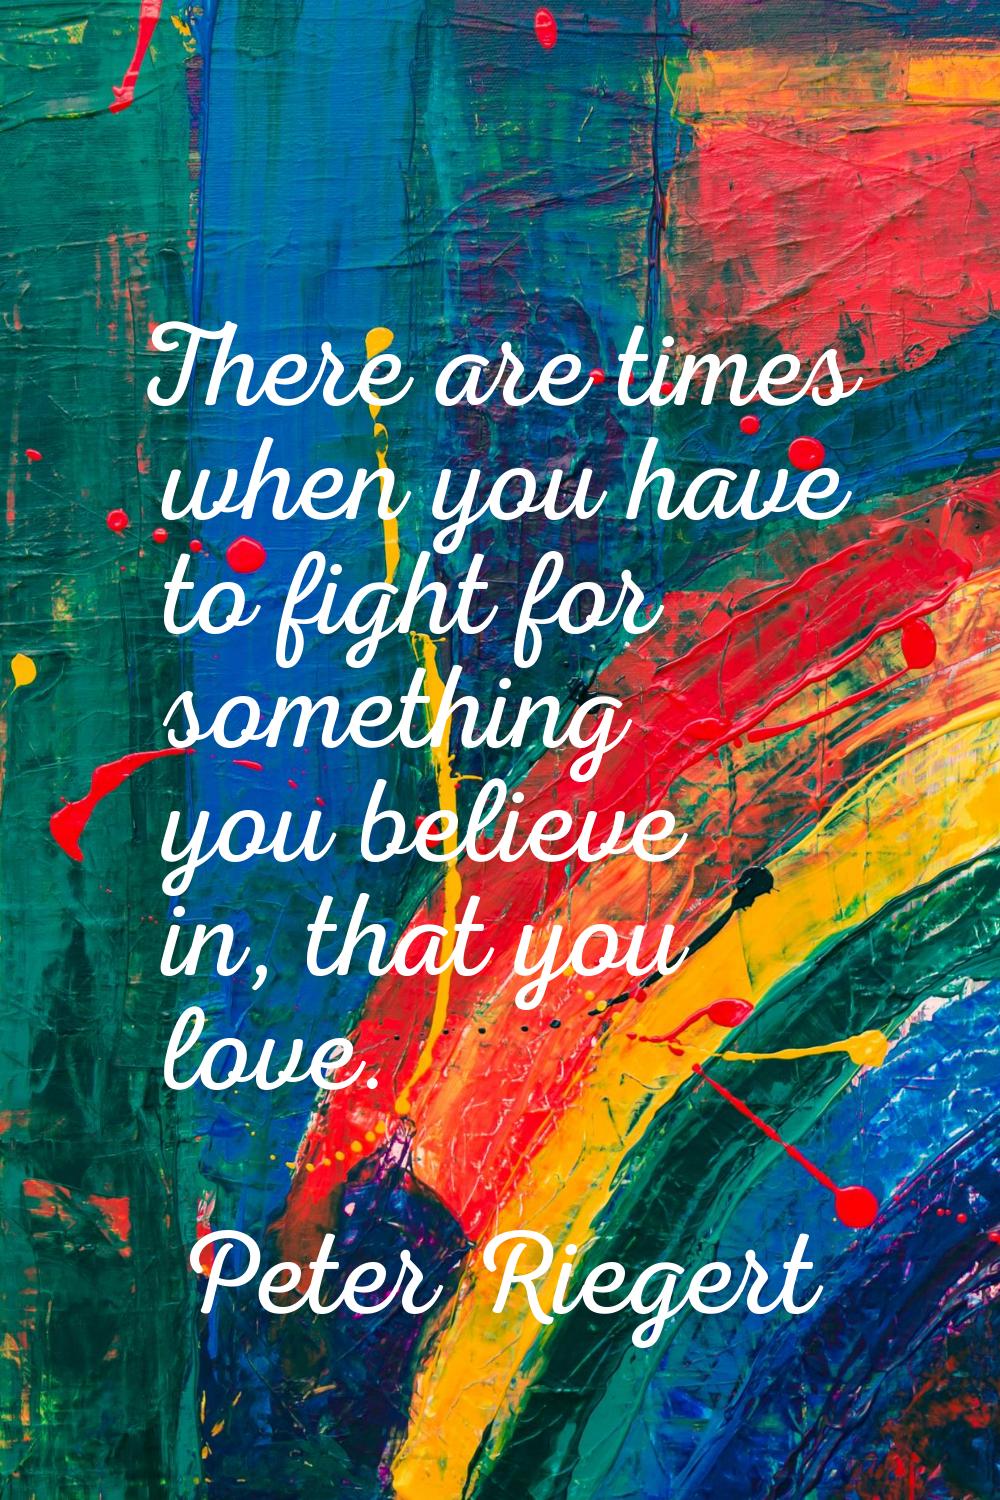 There are times when you have to fight for something you believe in, that you love.